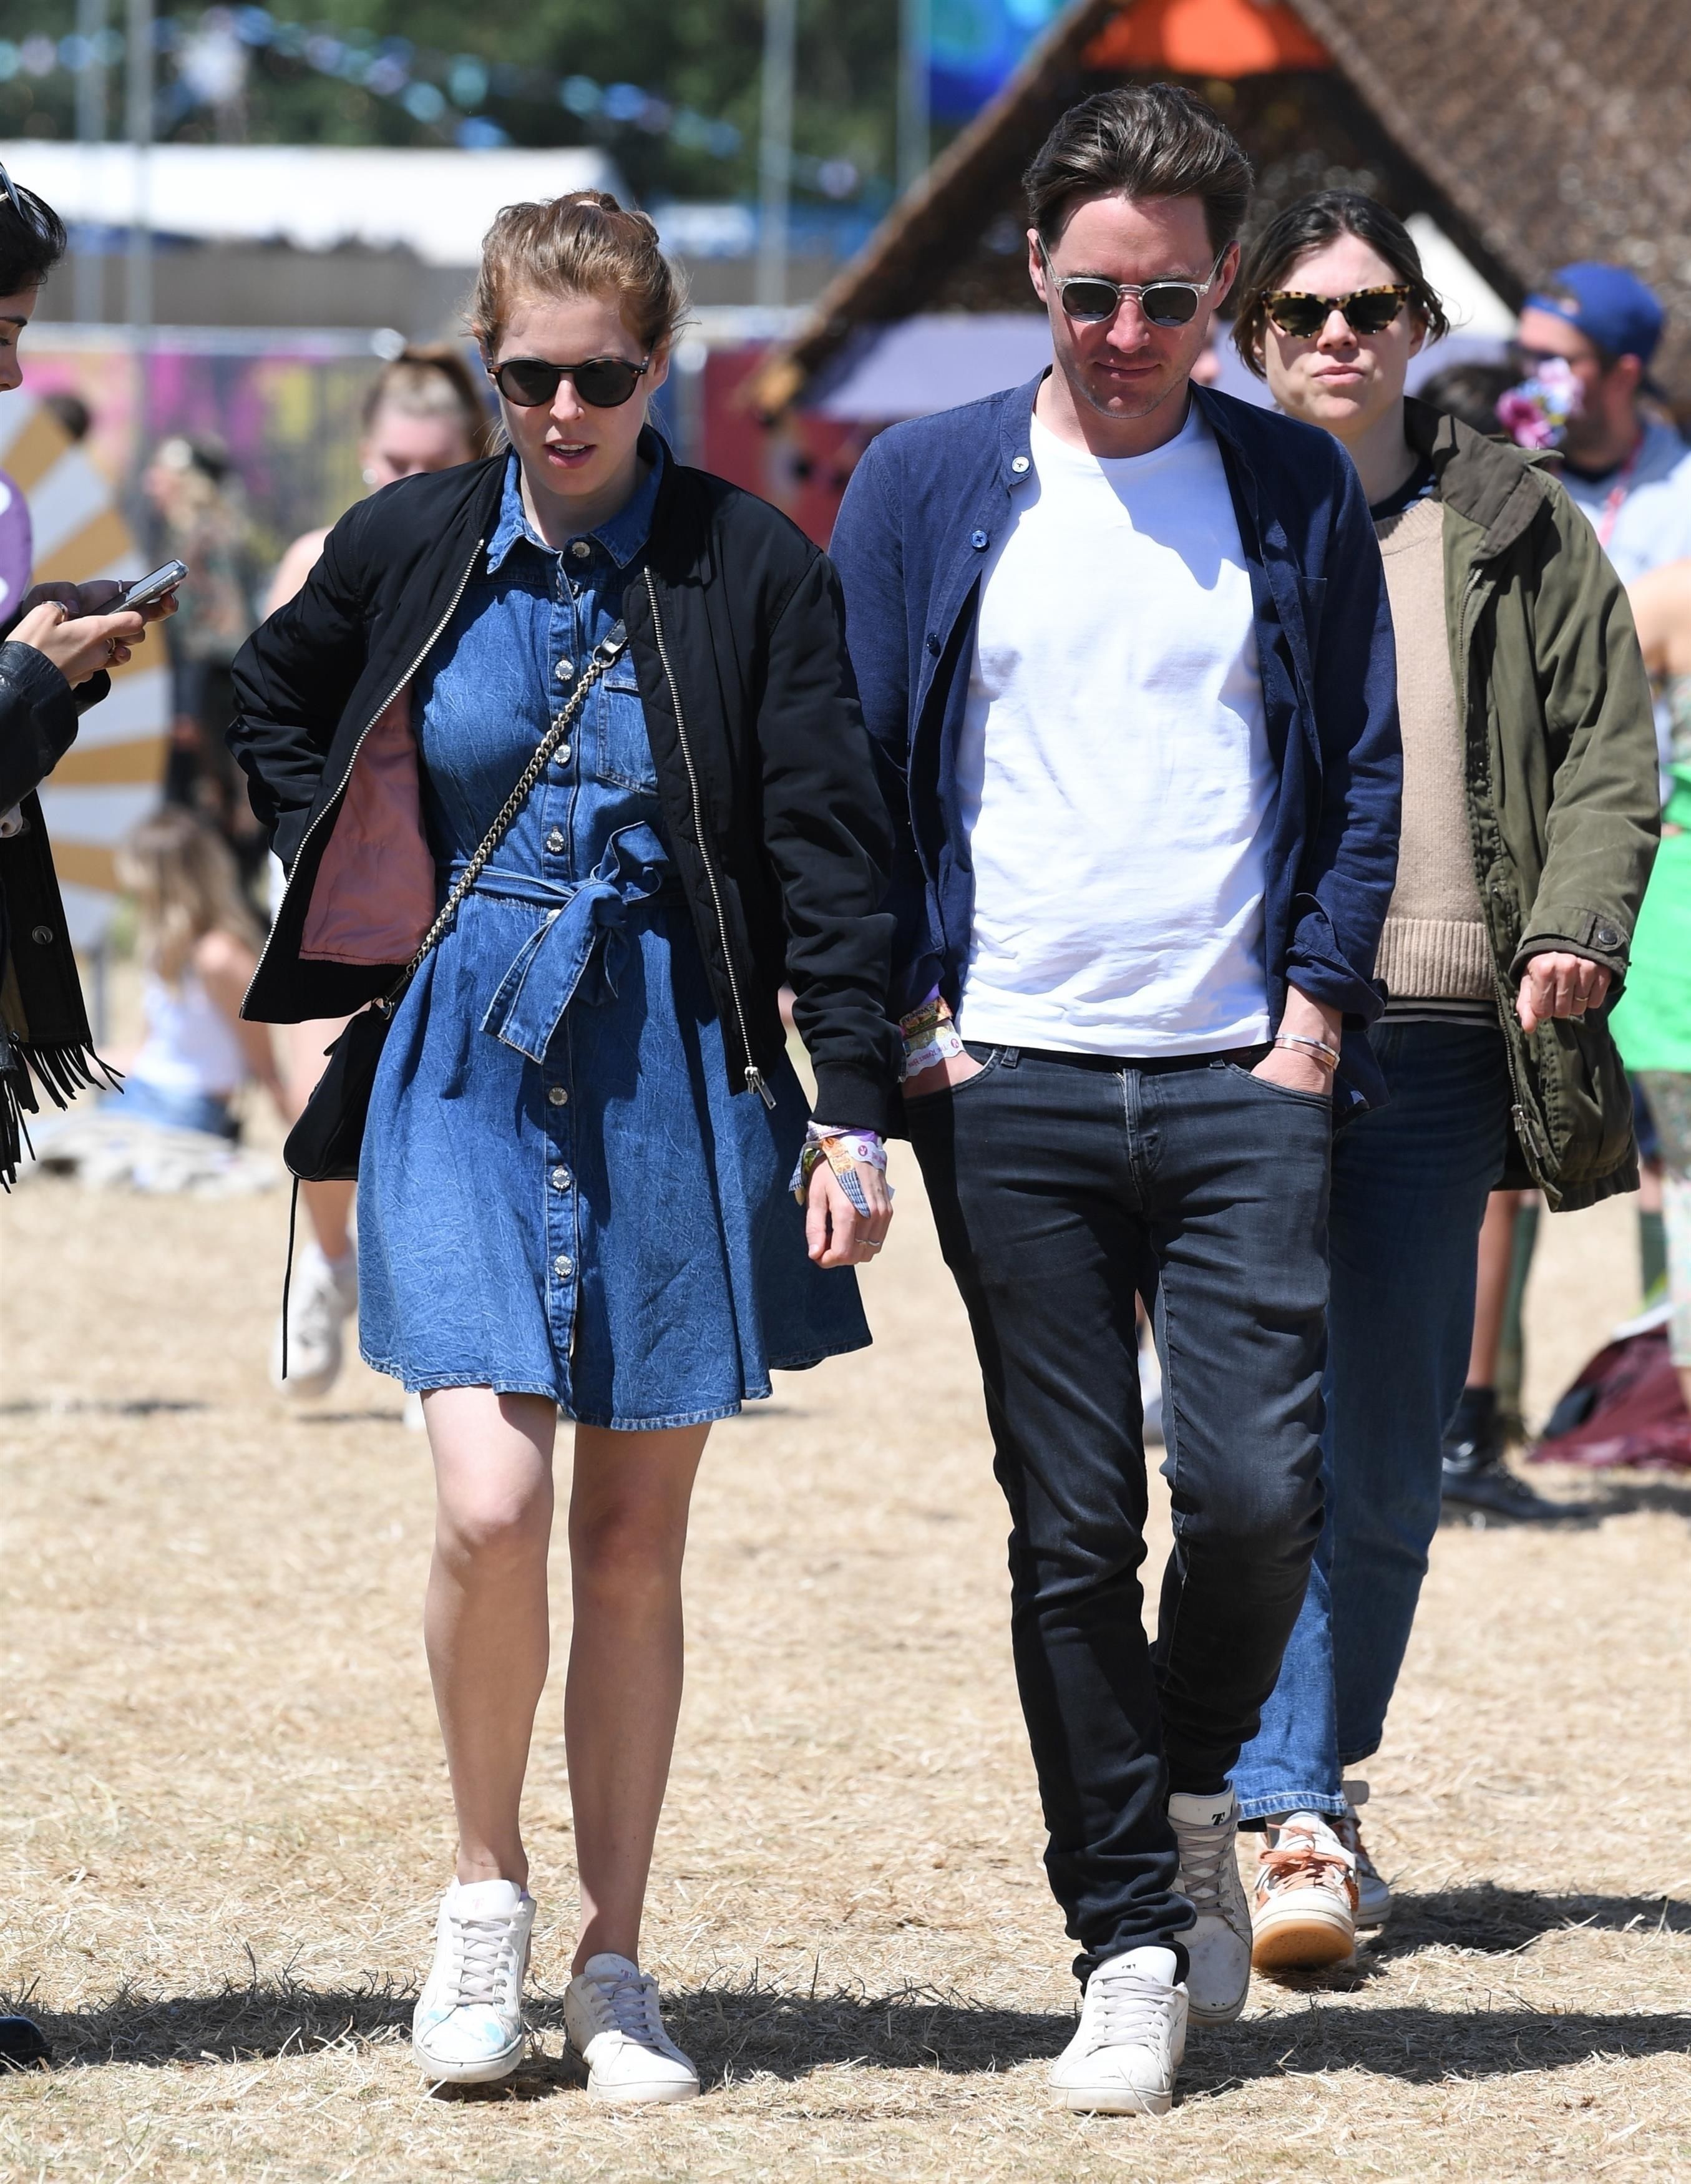 Princess Beatrice Looked Cute and Casual at Glastonbury Music Festival Over the Weekend